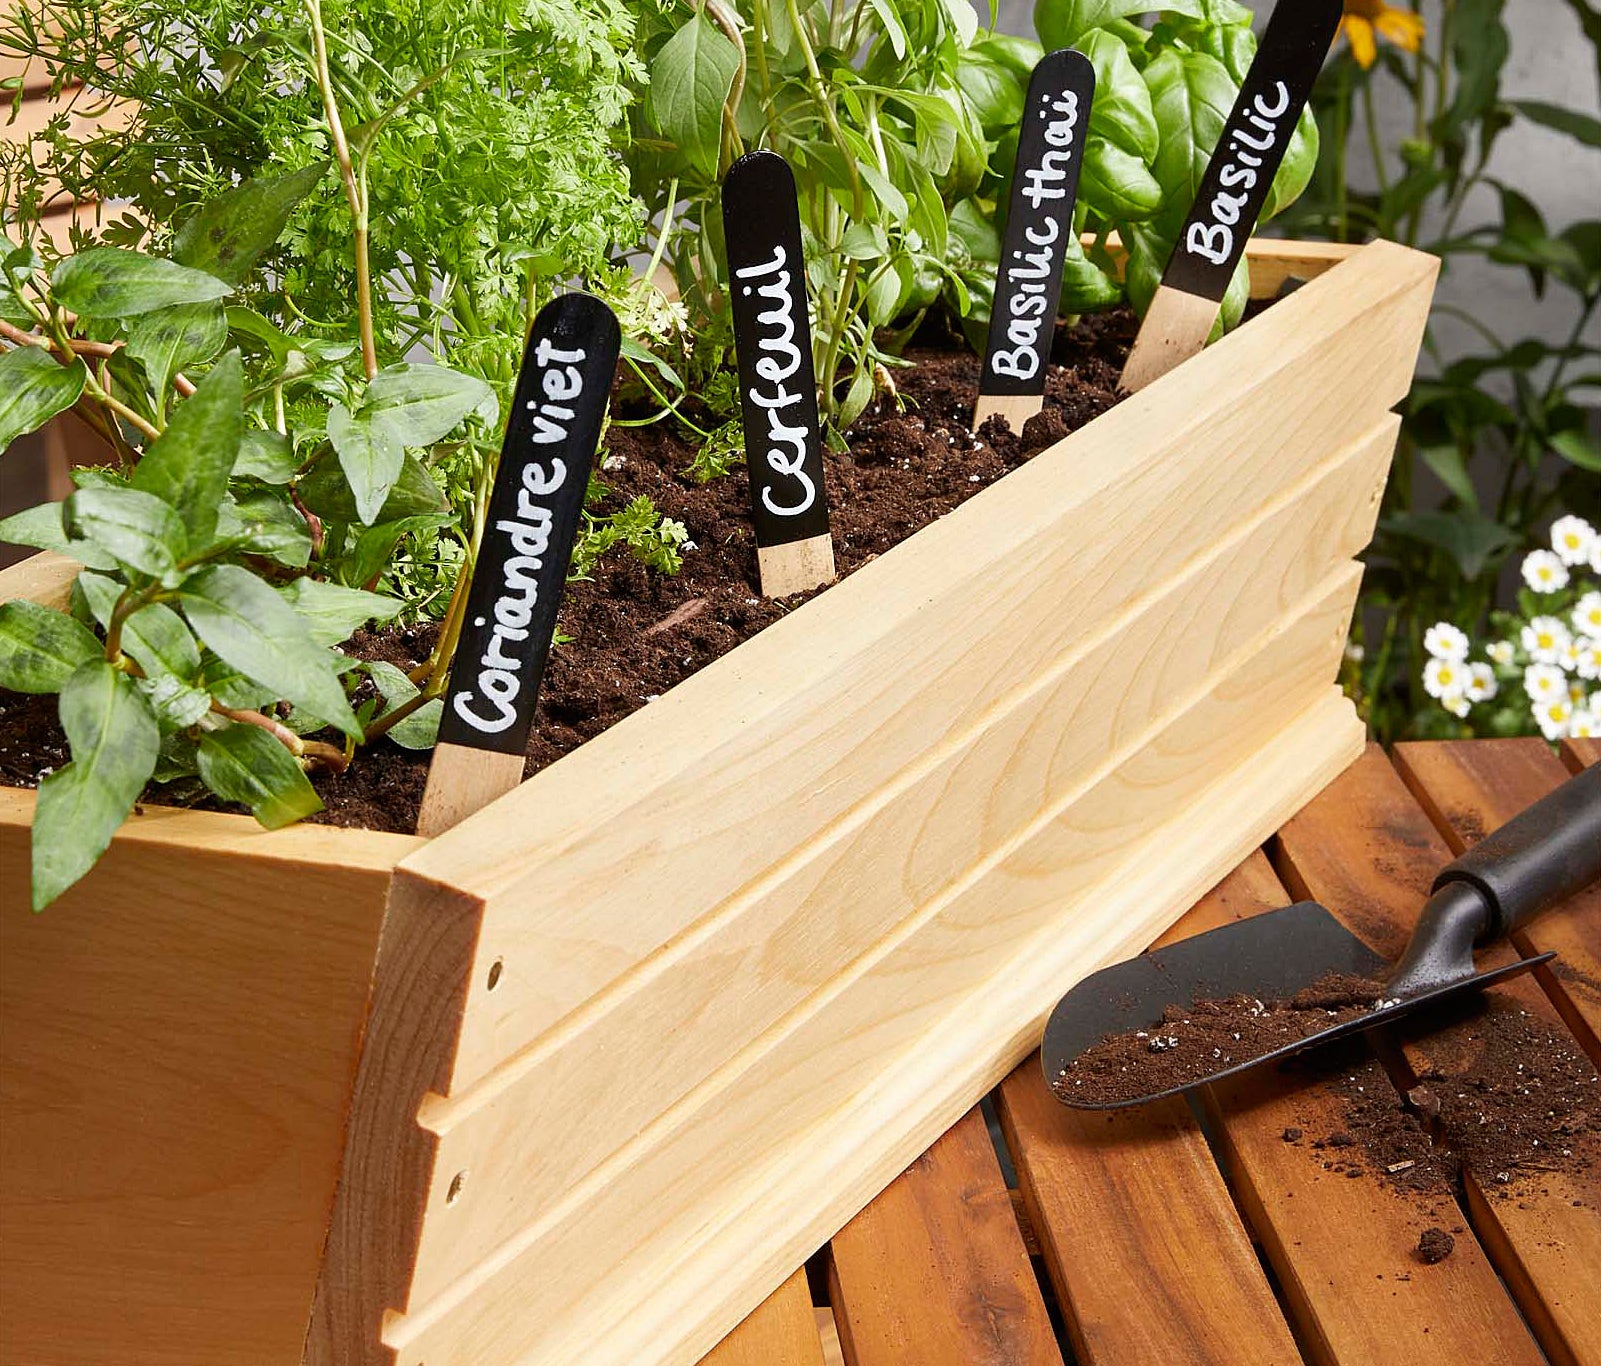 chalk-written garden markers in a wooden pot filled with herbs